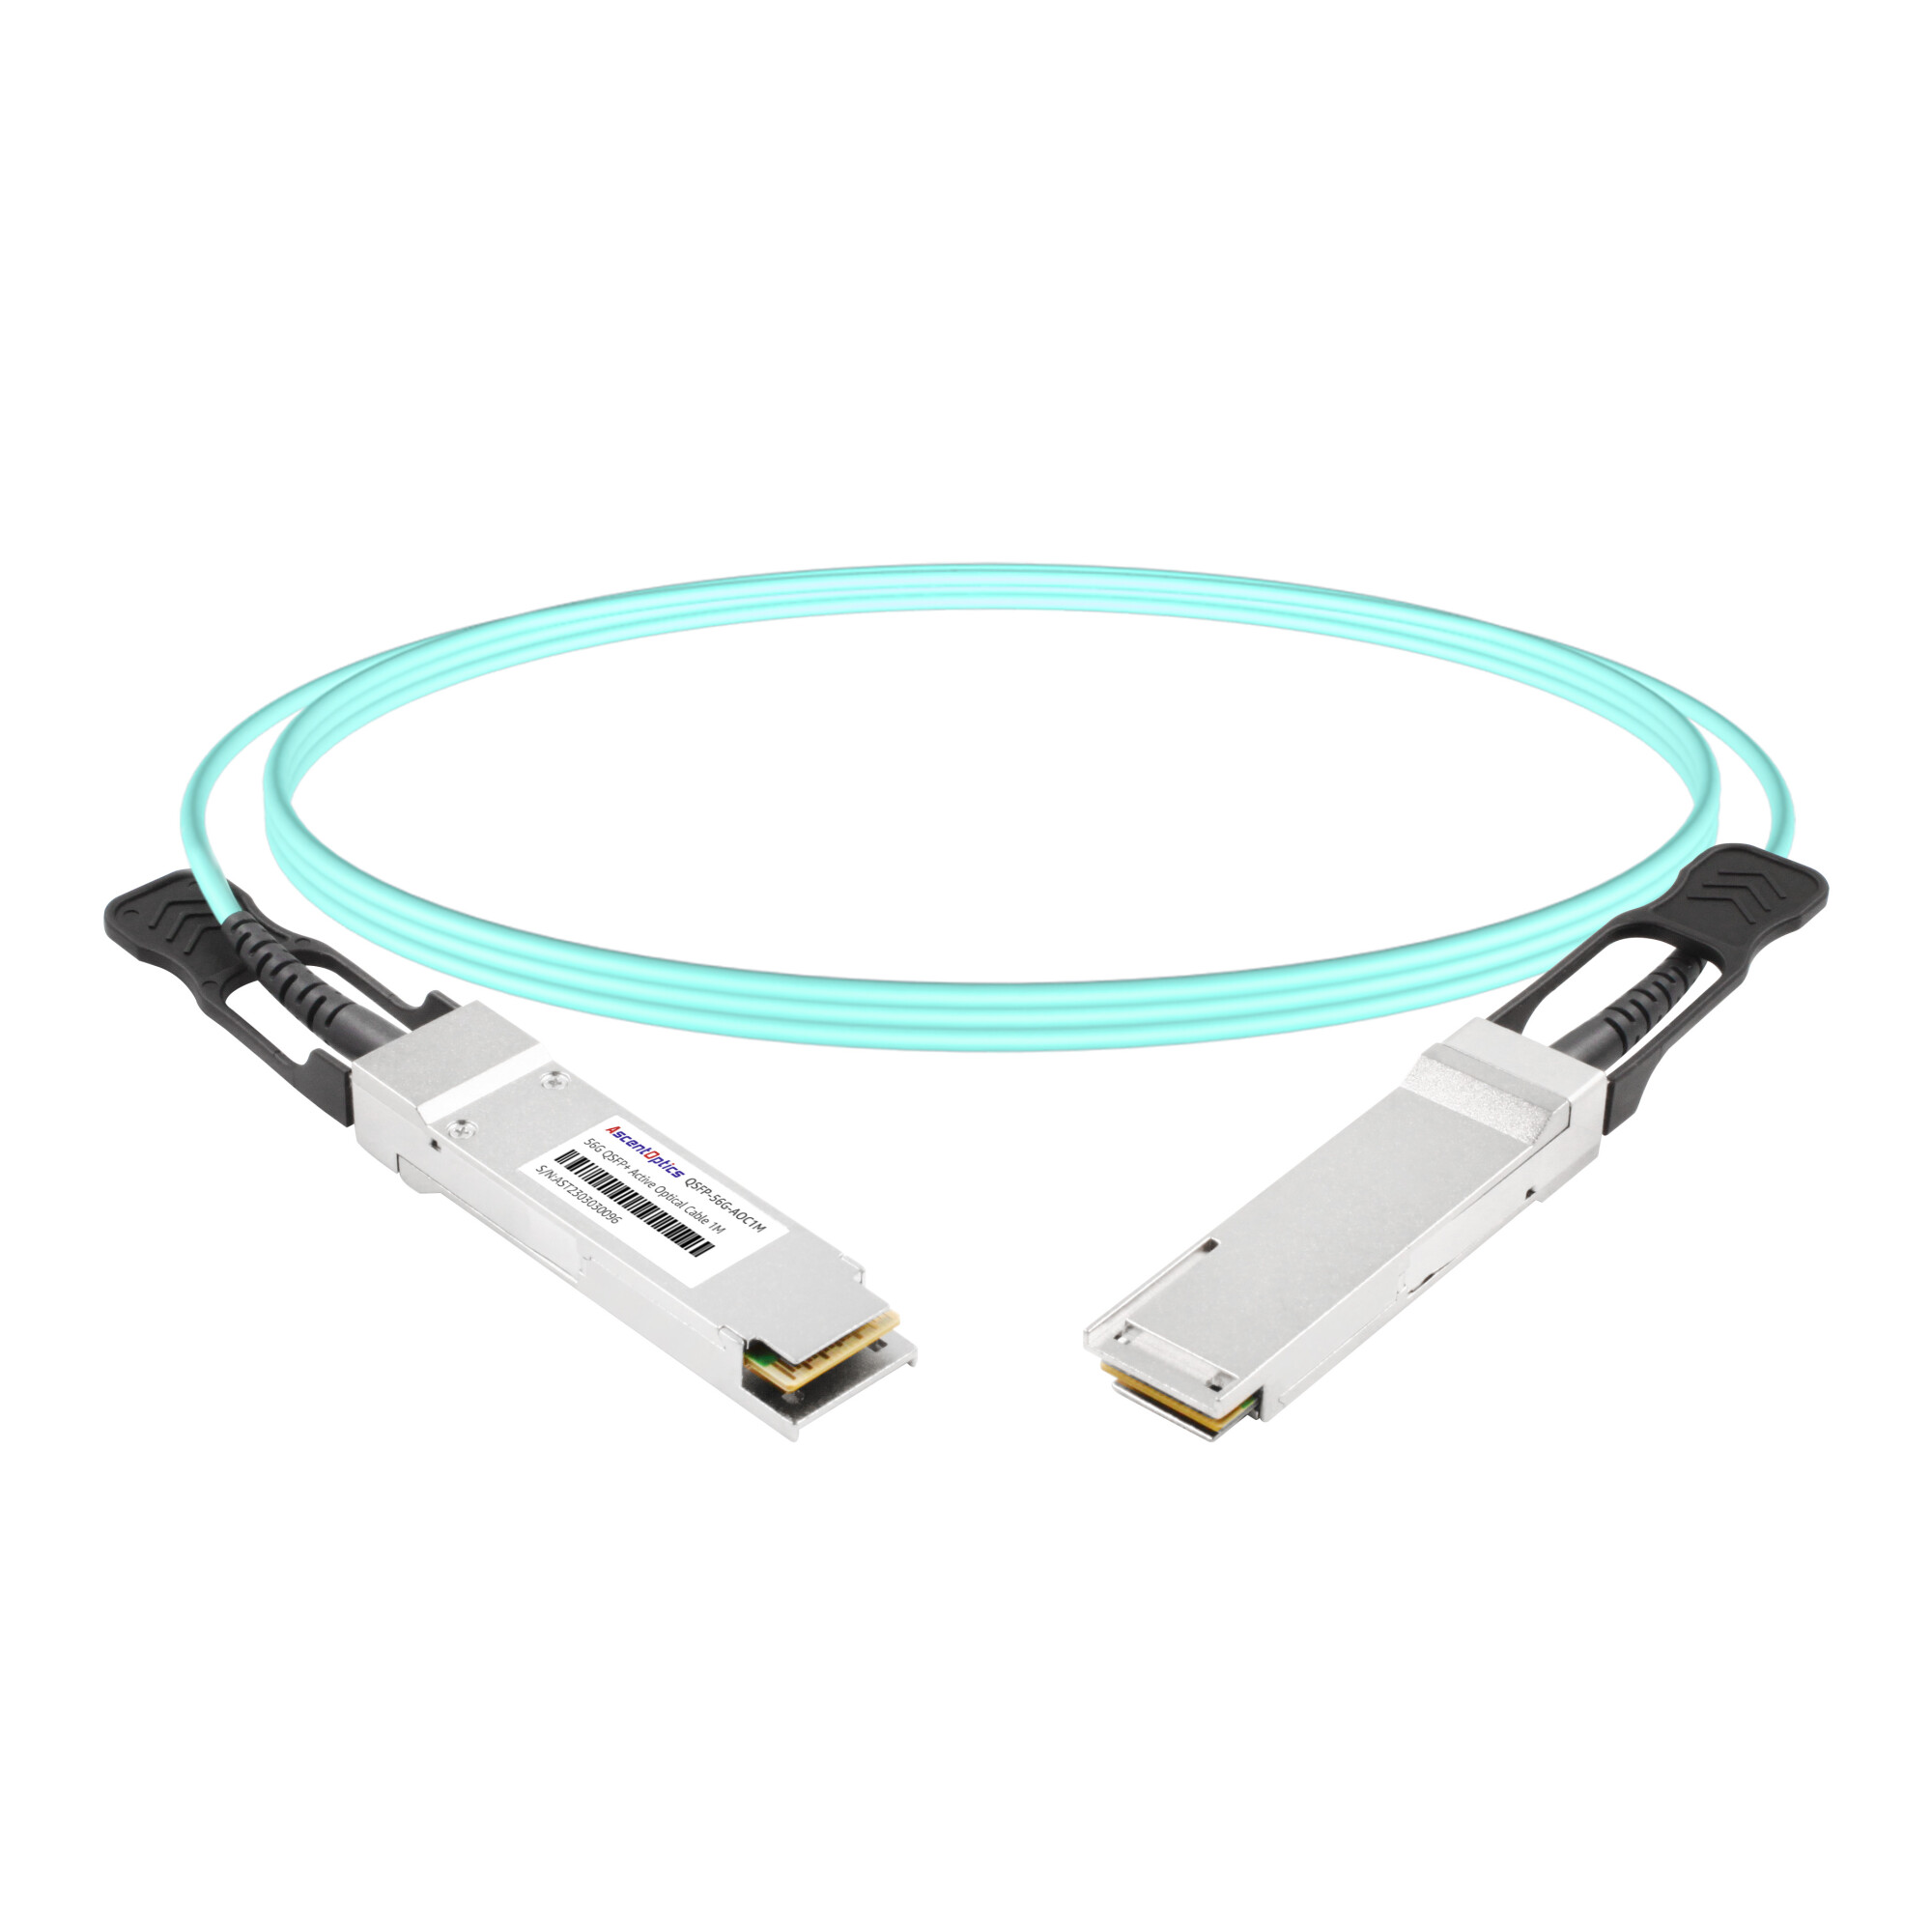 56G QSFP+ Active Optical Cable,1 Meter